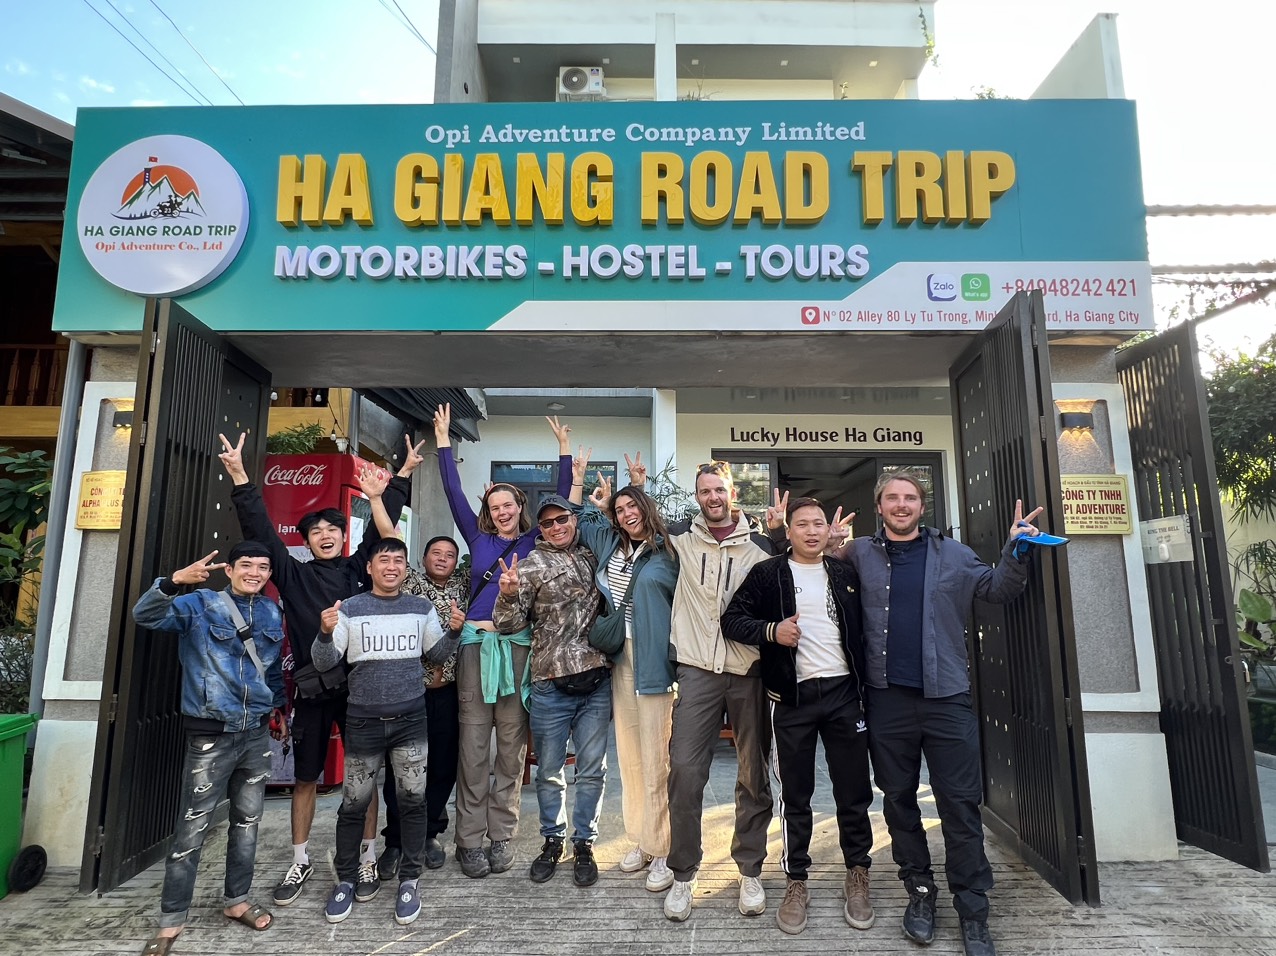 ha giang road trip hostel and tours